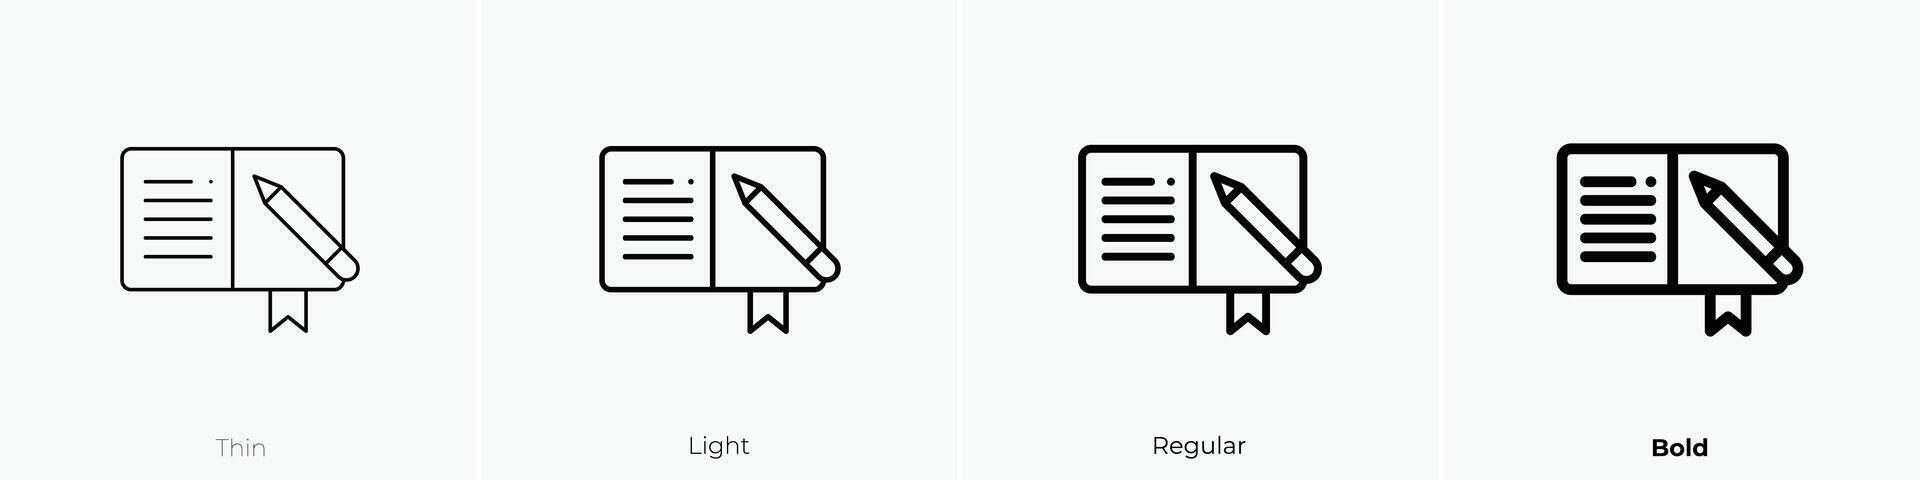 notebook icon. Thin, Light, Regular And Bold style design isolated on white background vector